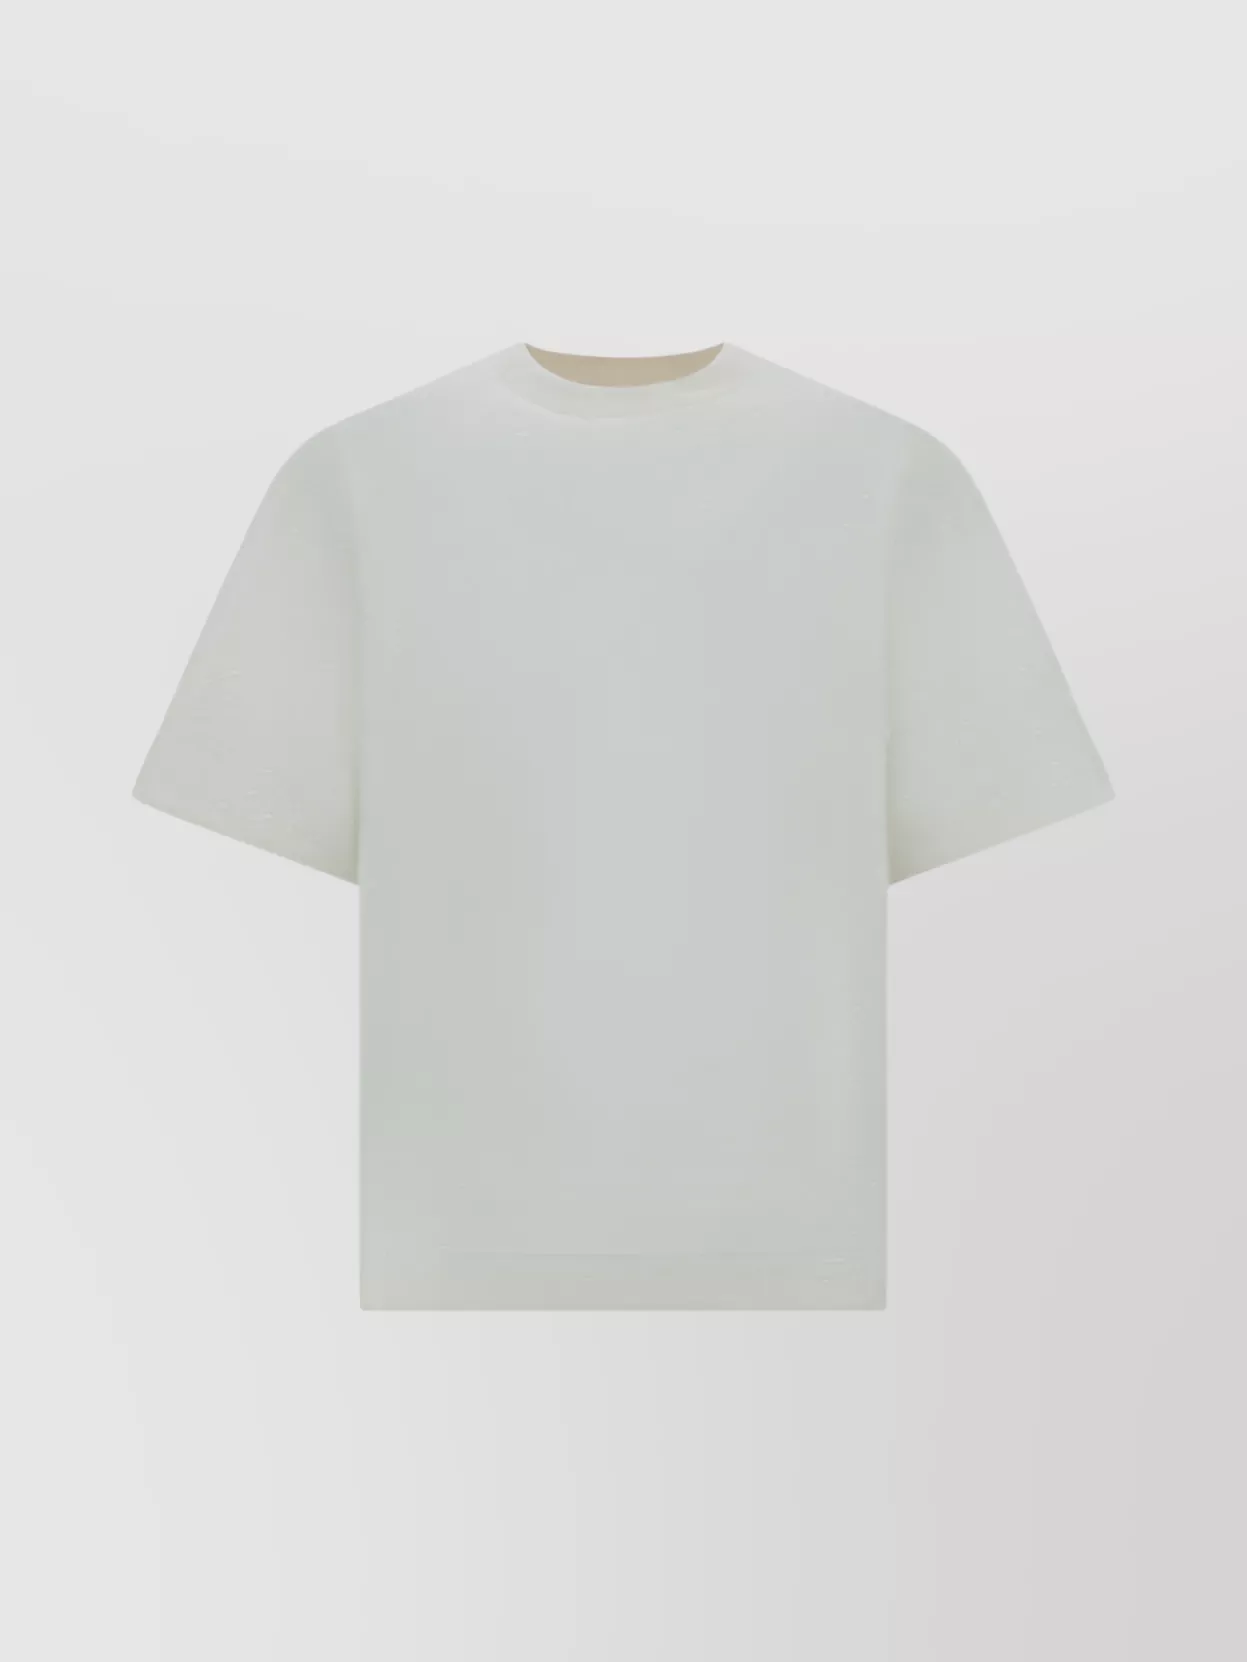 Jil Sander Patterned Crew Neck T-shirt With Zipper Applique In White